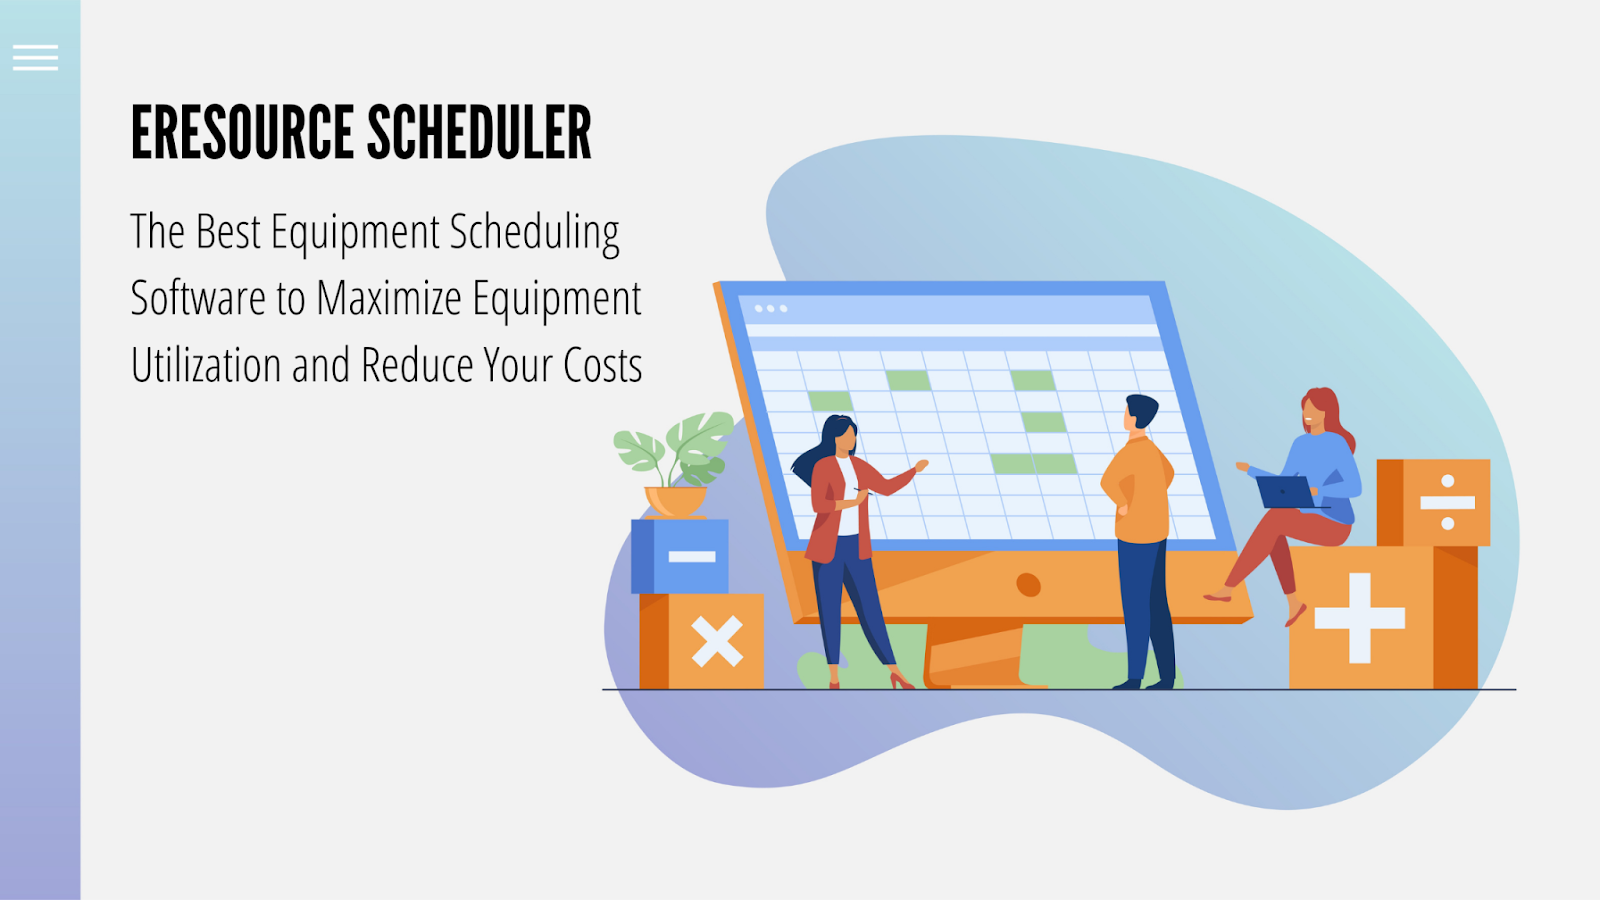 eResource Scheduler - The Best Equipment Scheduling Software to Maximize Equipment Utilization and Reduce Your Costs